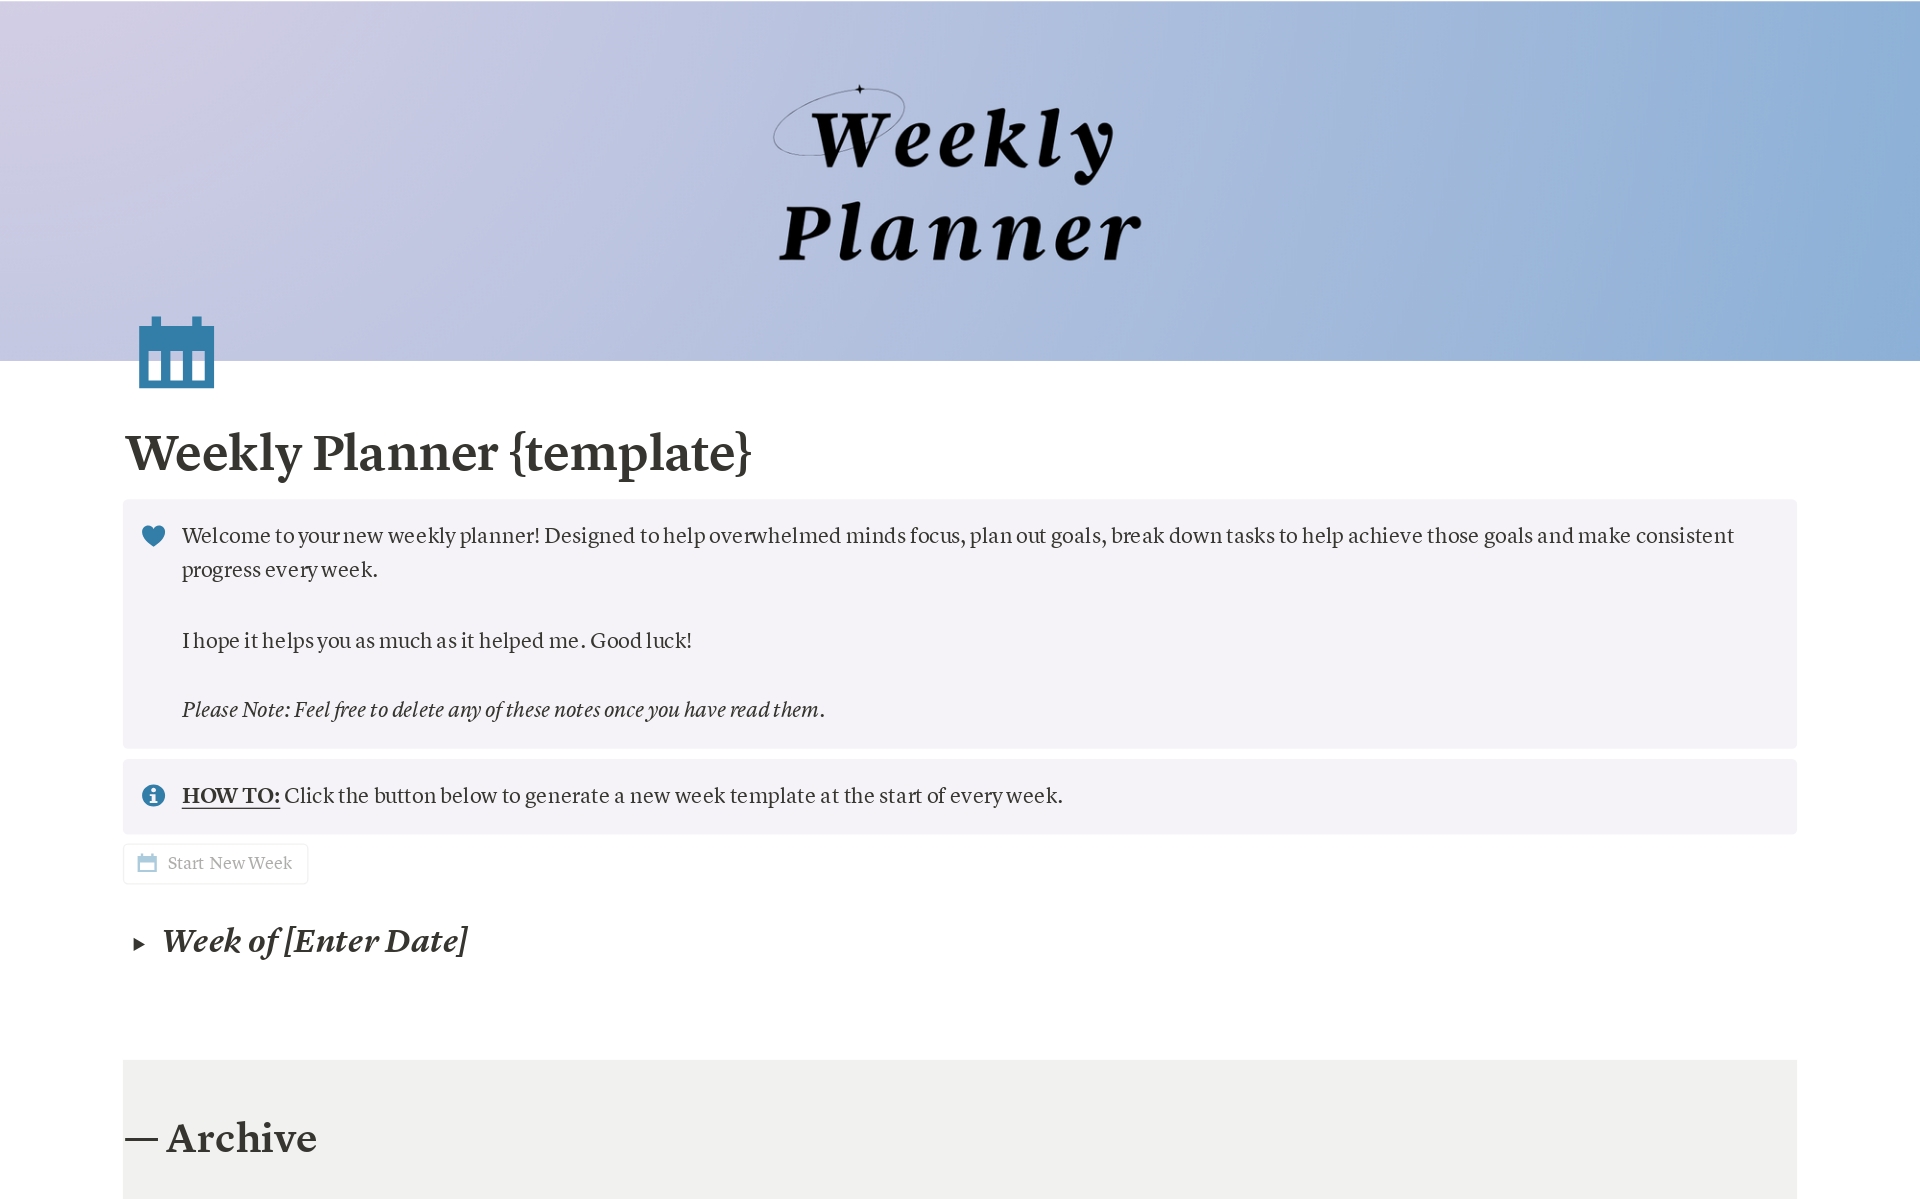 A simple weekly planner to help overwhelmed minds focus and get things done. Ideal for studying, freelancers and planning individual work.